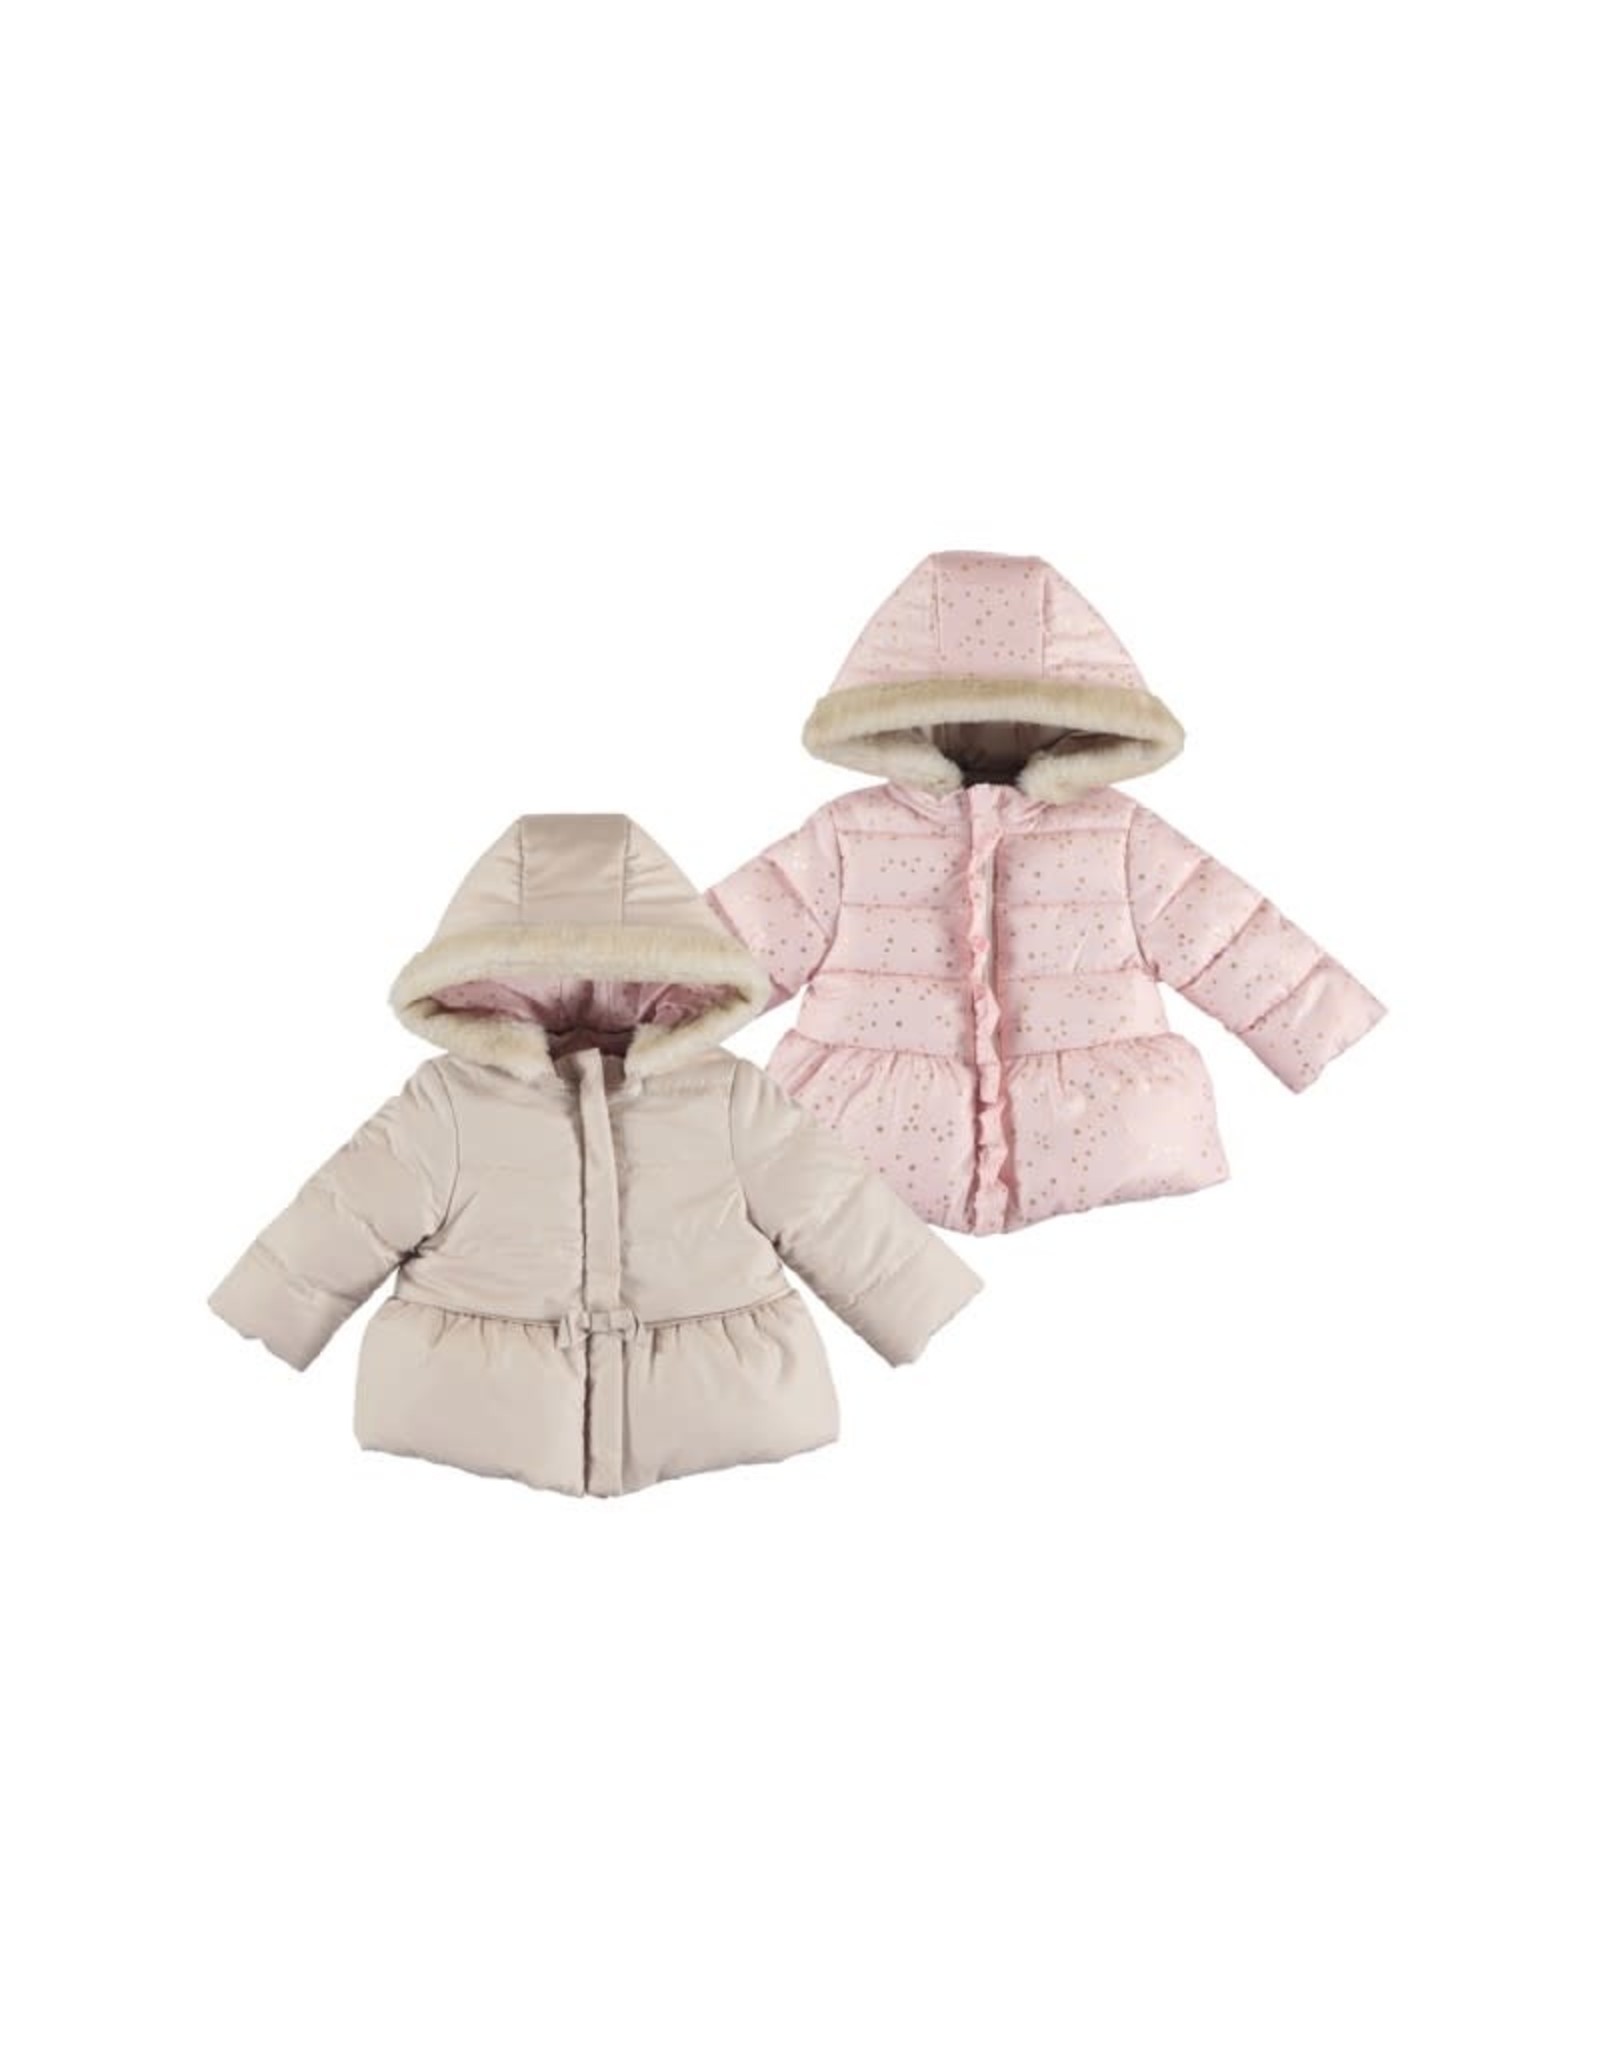 Mayoral Star Lined Reversible Winter Coat